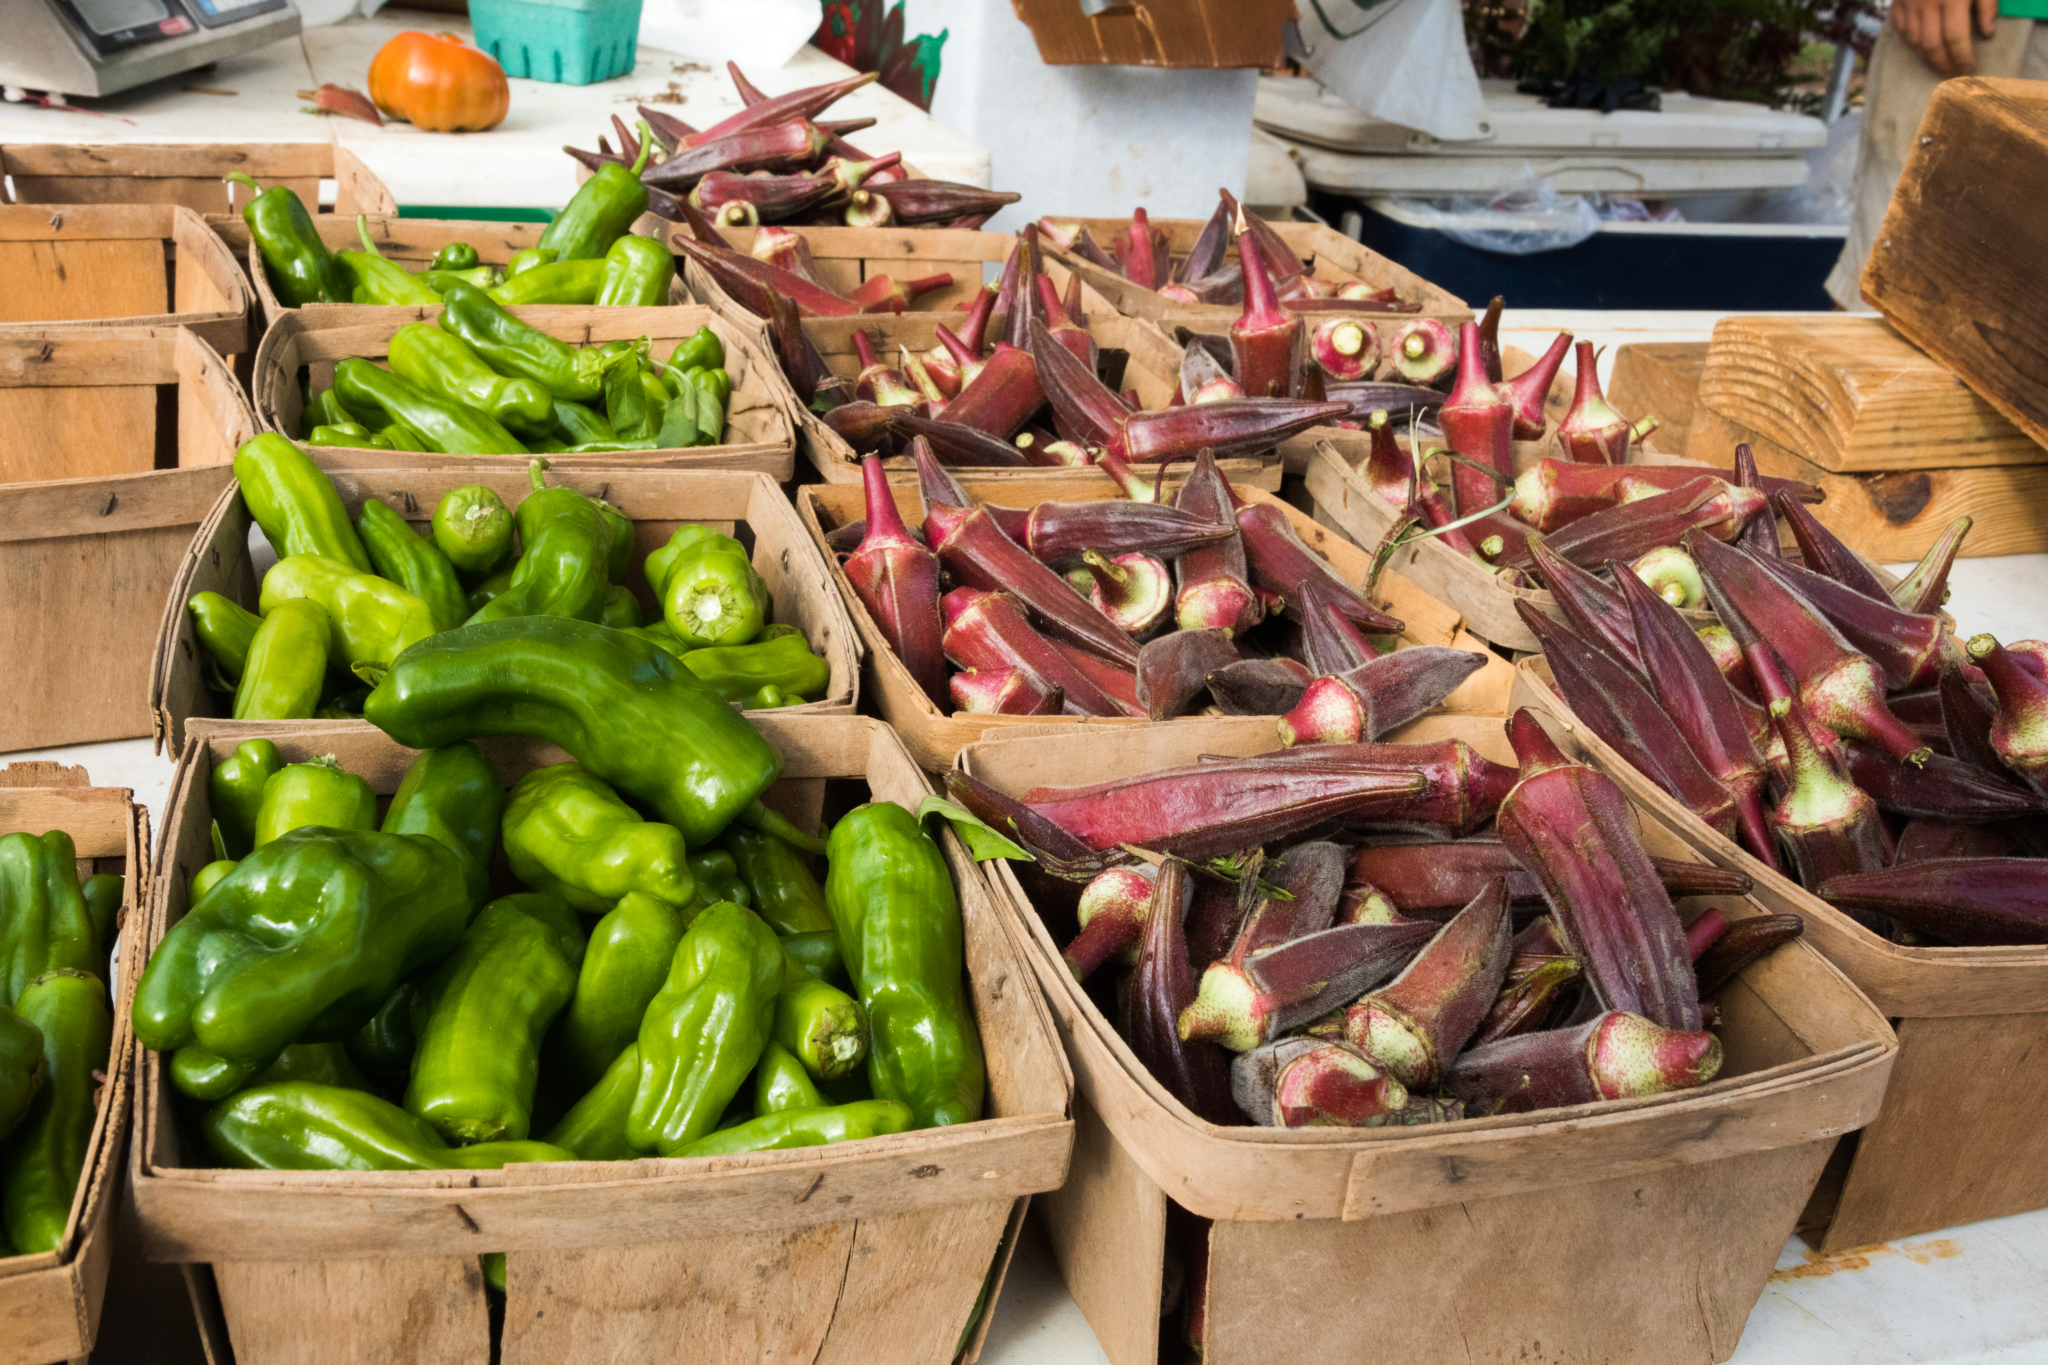 Okra 1 Prevent type 2 diabetes with 5 tips from Blue Cross and Blue Shield of Alabama